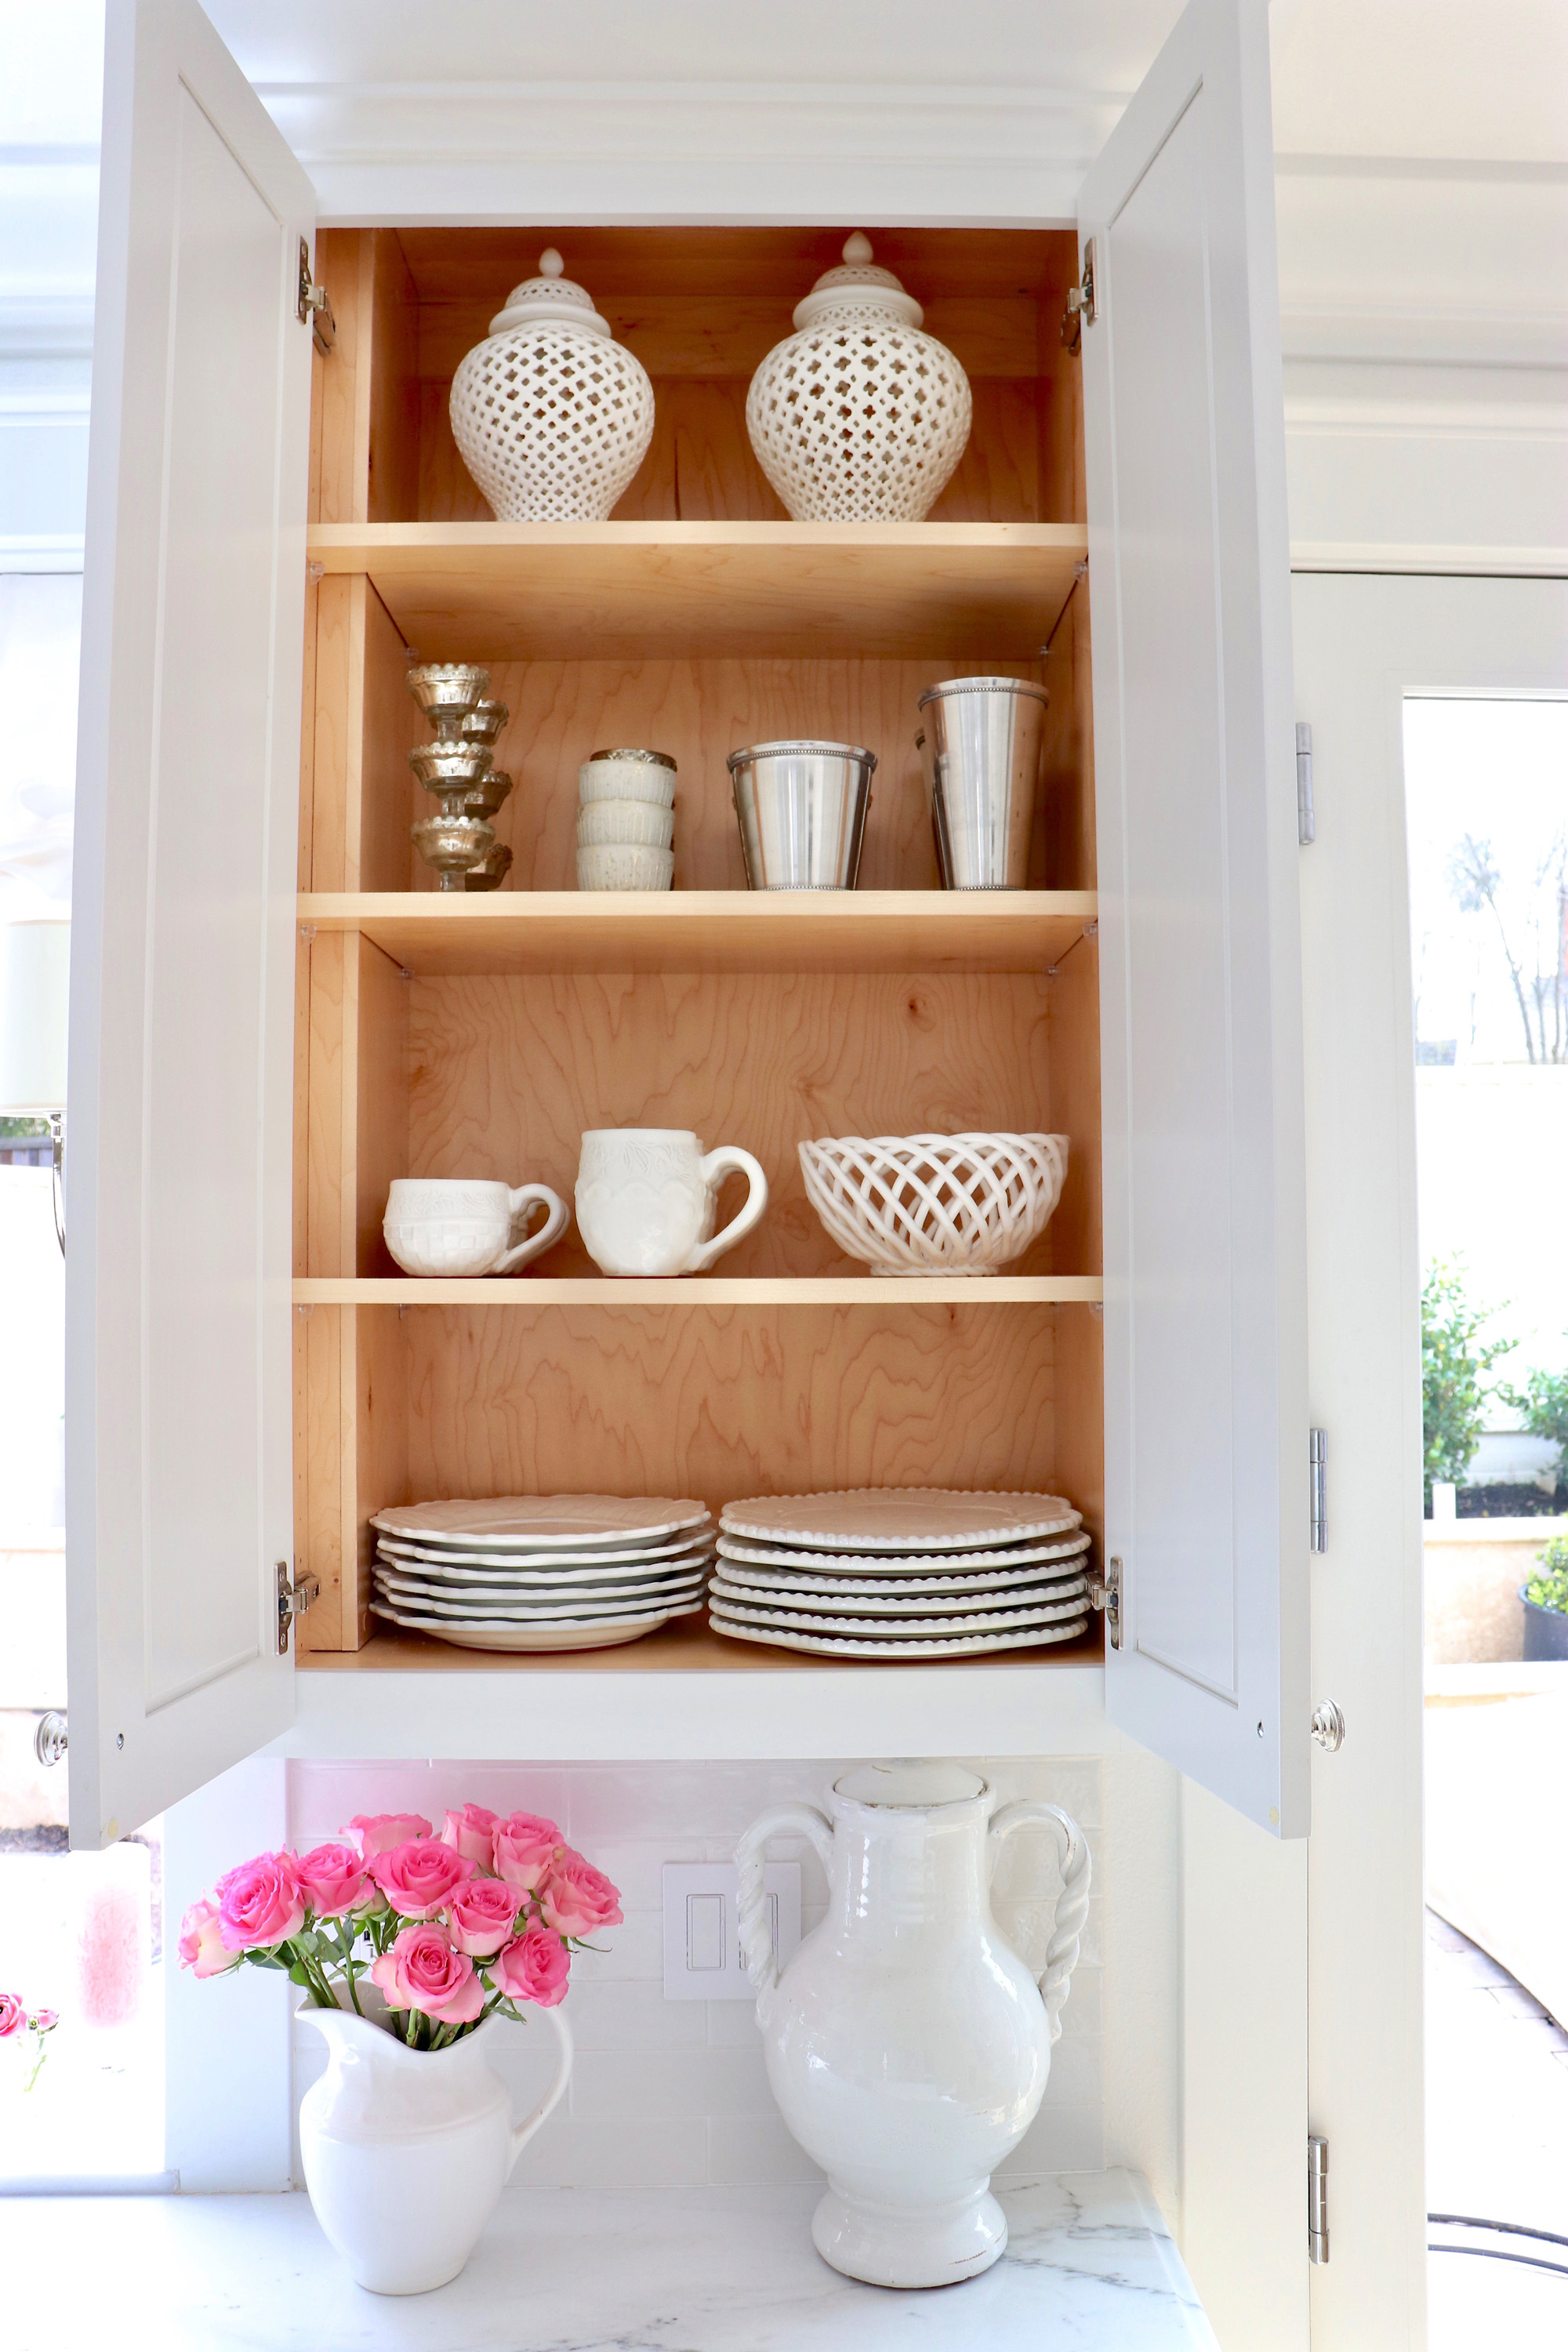 https://kristywicks.com/wp-content/uploads/2018/03/Organizing-My-Kitchen-With-Help-From-The-Container-Store-Kristy-Wicks.1.jpg